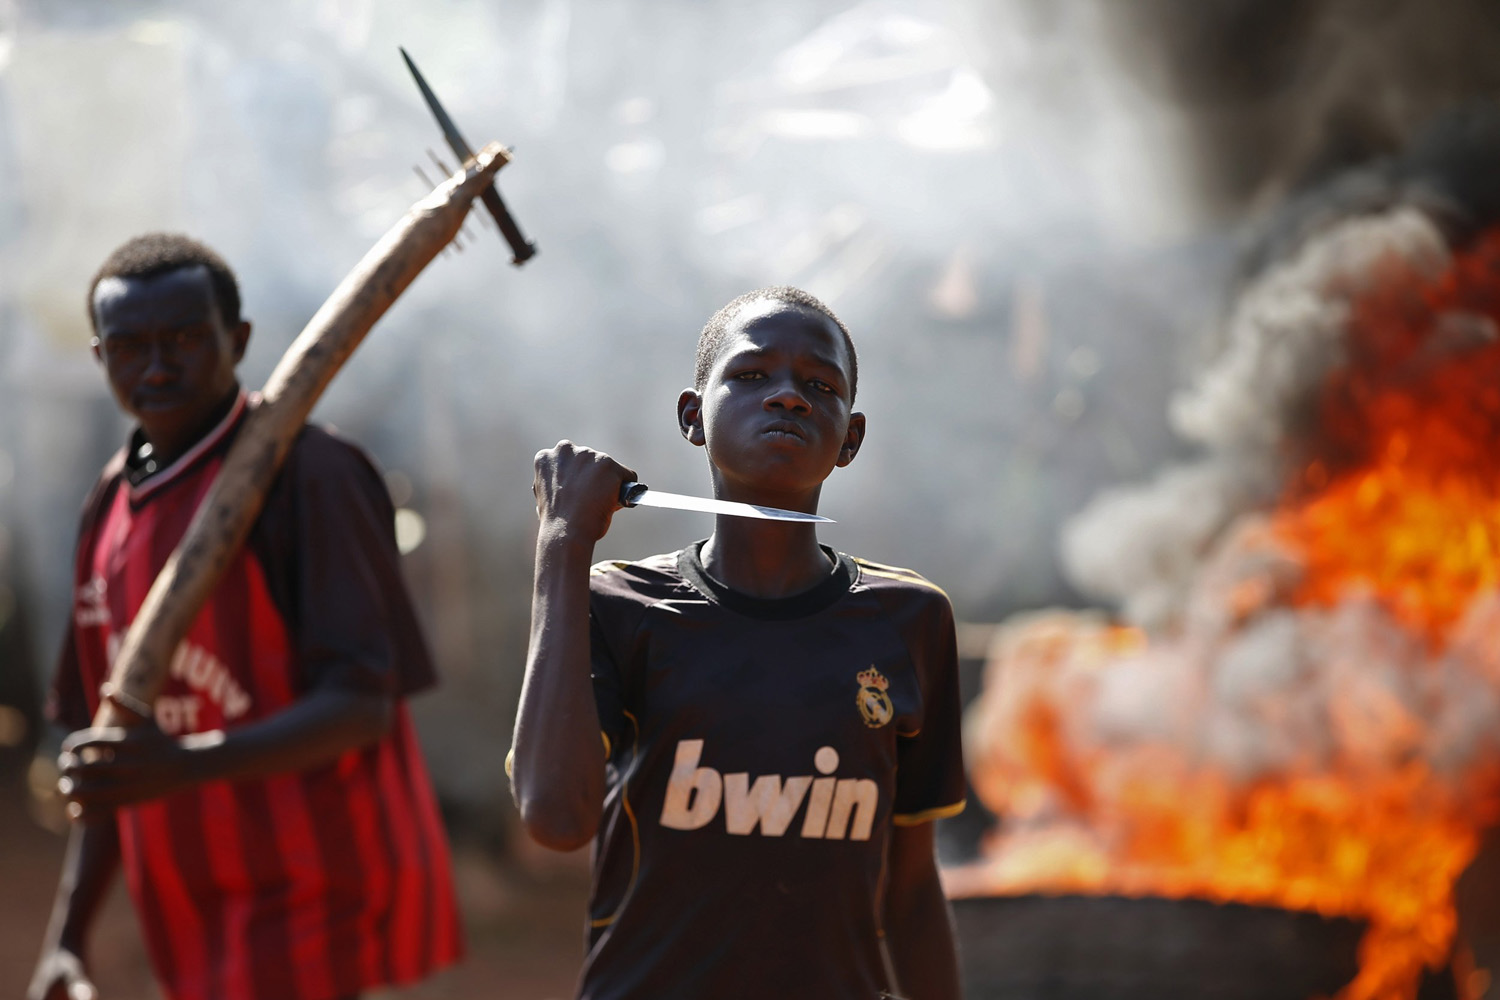 A boy gestures in front of a barricade on fire during a protest after French troops opened fire at protesters blocking a road in Bambari